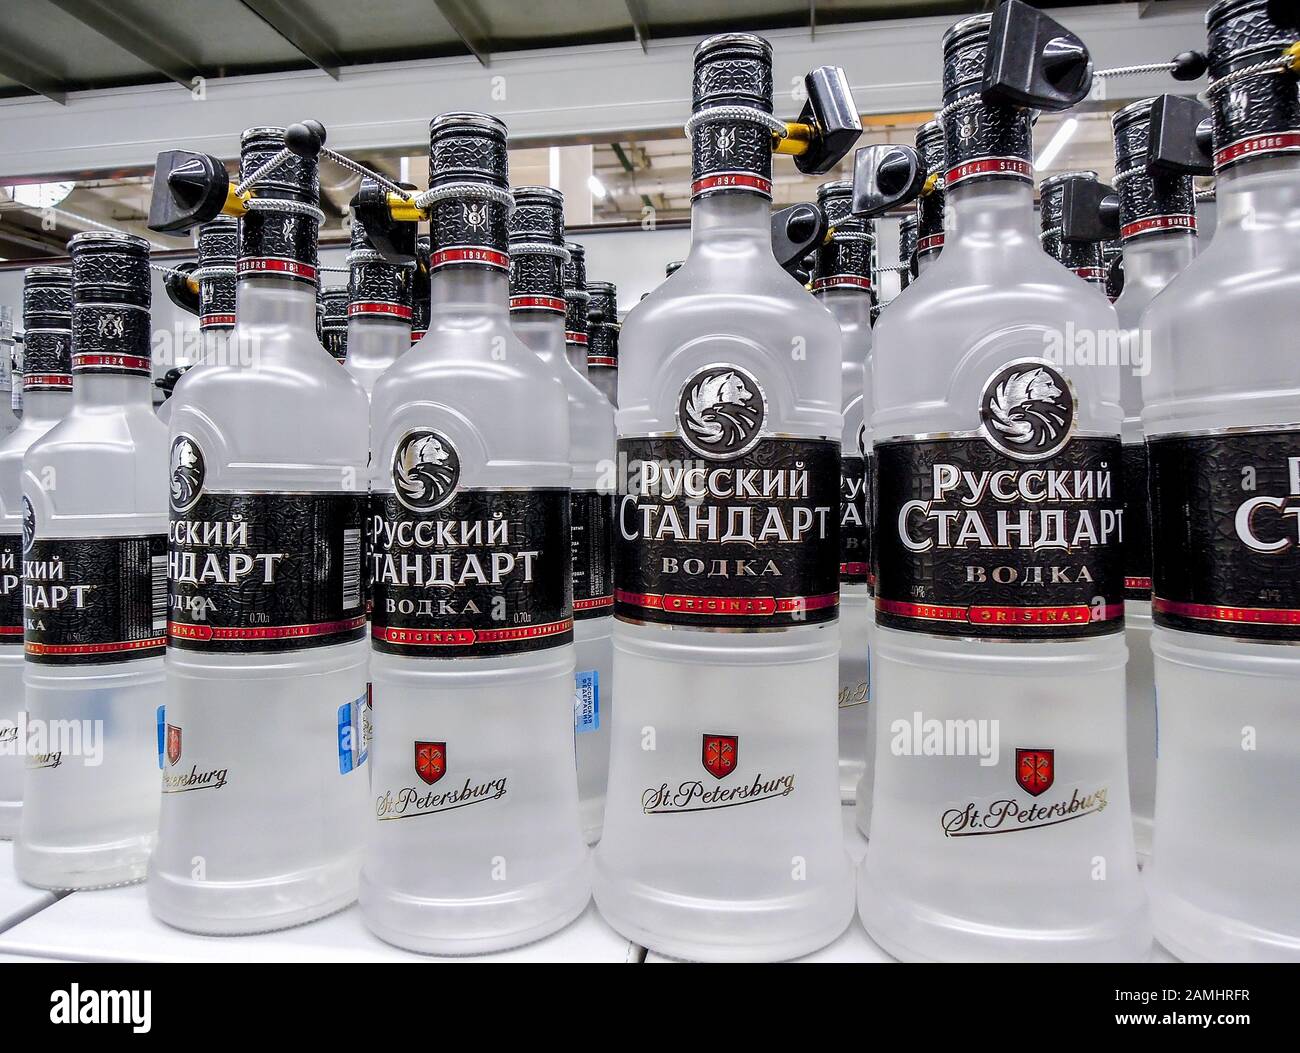 Samara, Russia - January 12, 2020: Russian vodka ready for sale on the shelf in superstore. Various bottled alcoholic beverages Stock Photo